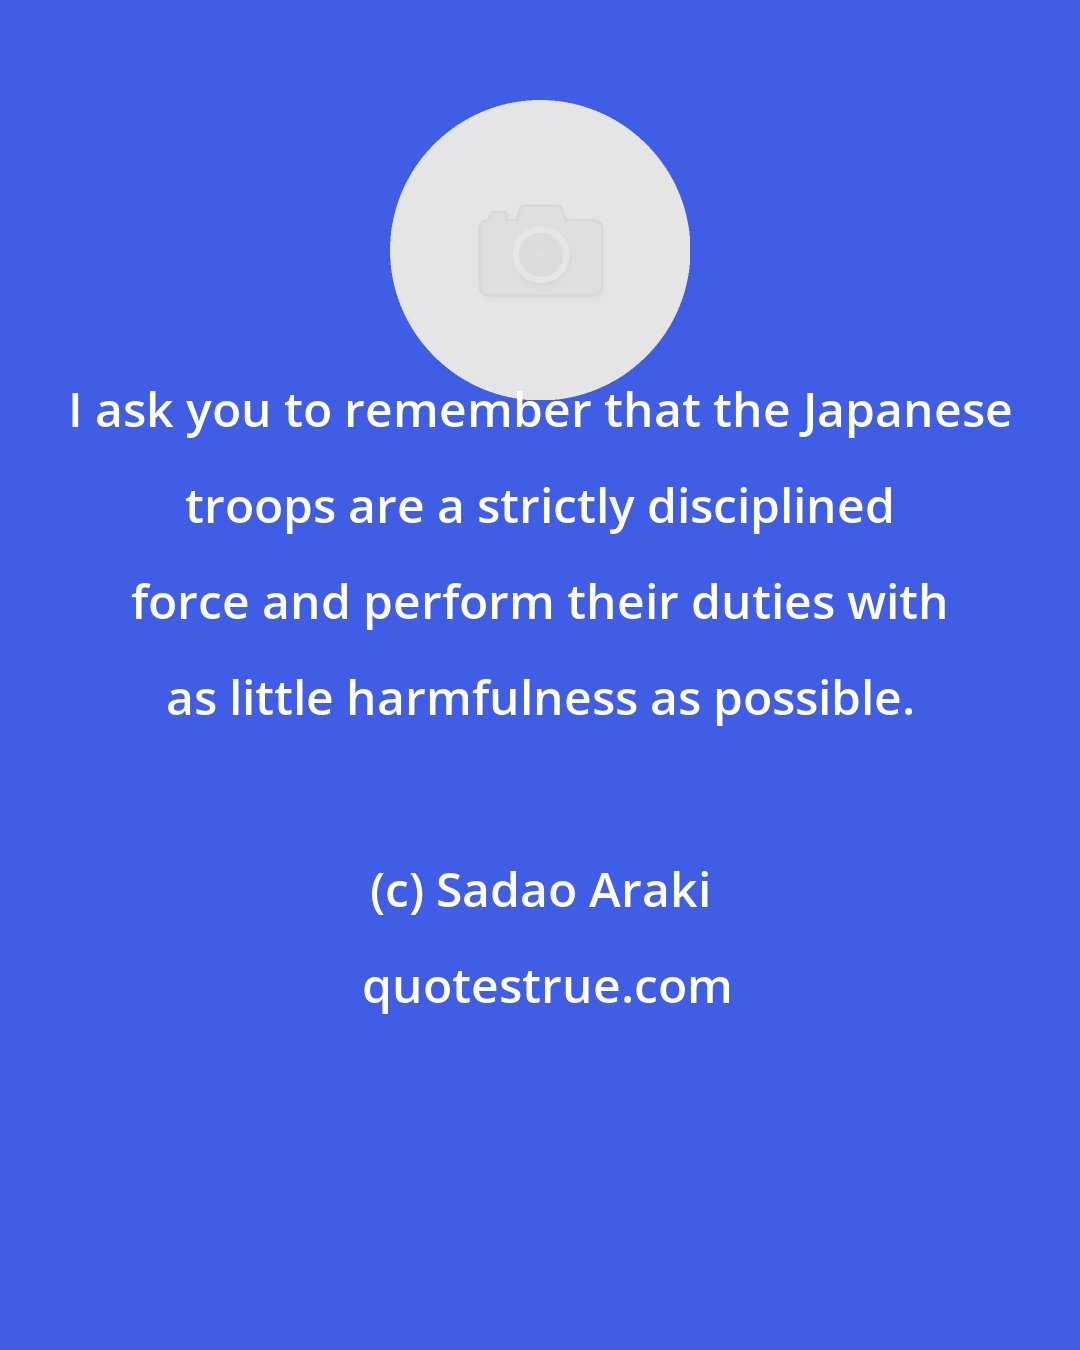 Sadao Araki: I ask you to remember that the Japanese troops are a strictly disciplined force and perform their duties with as little harmfulness as possible.